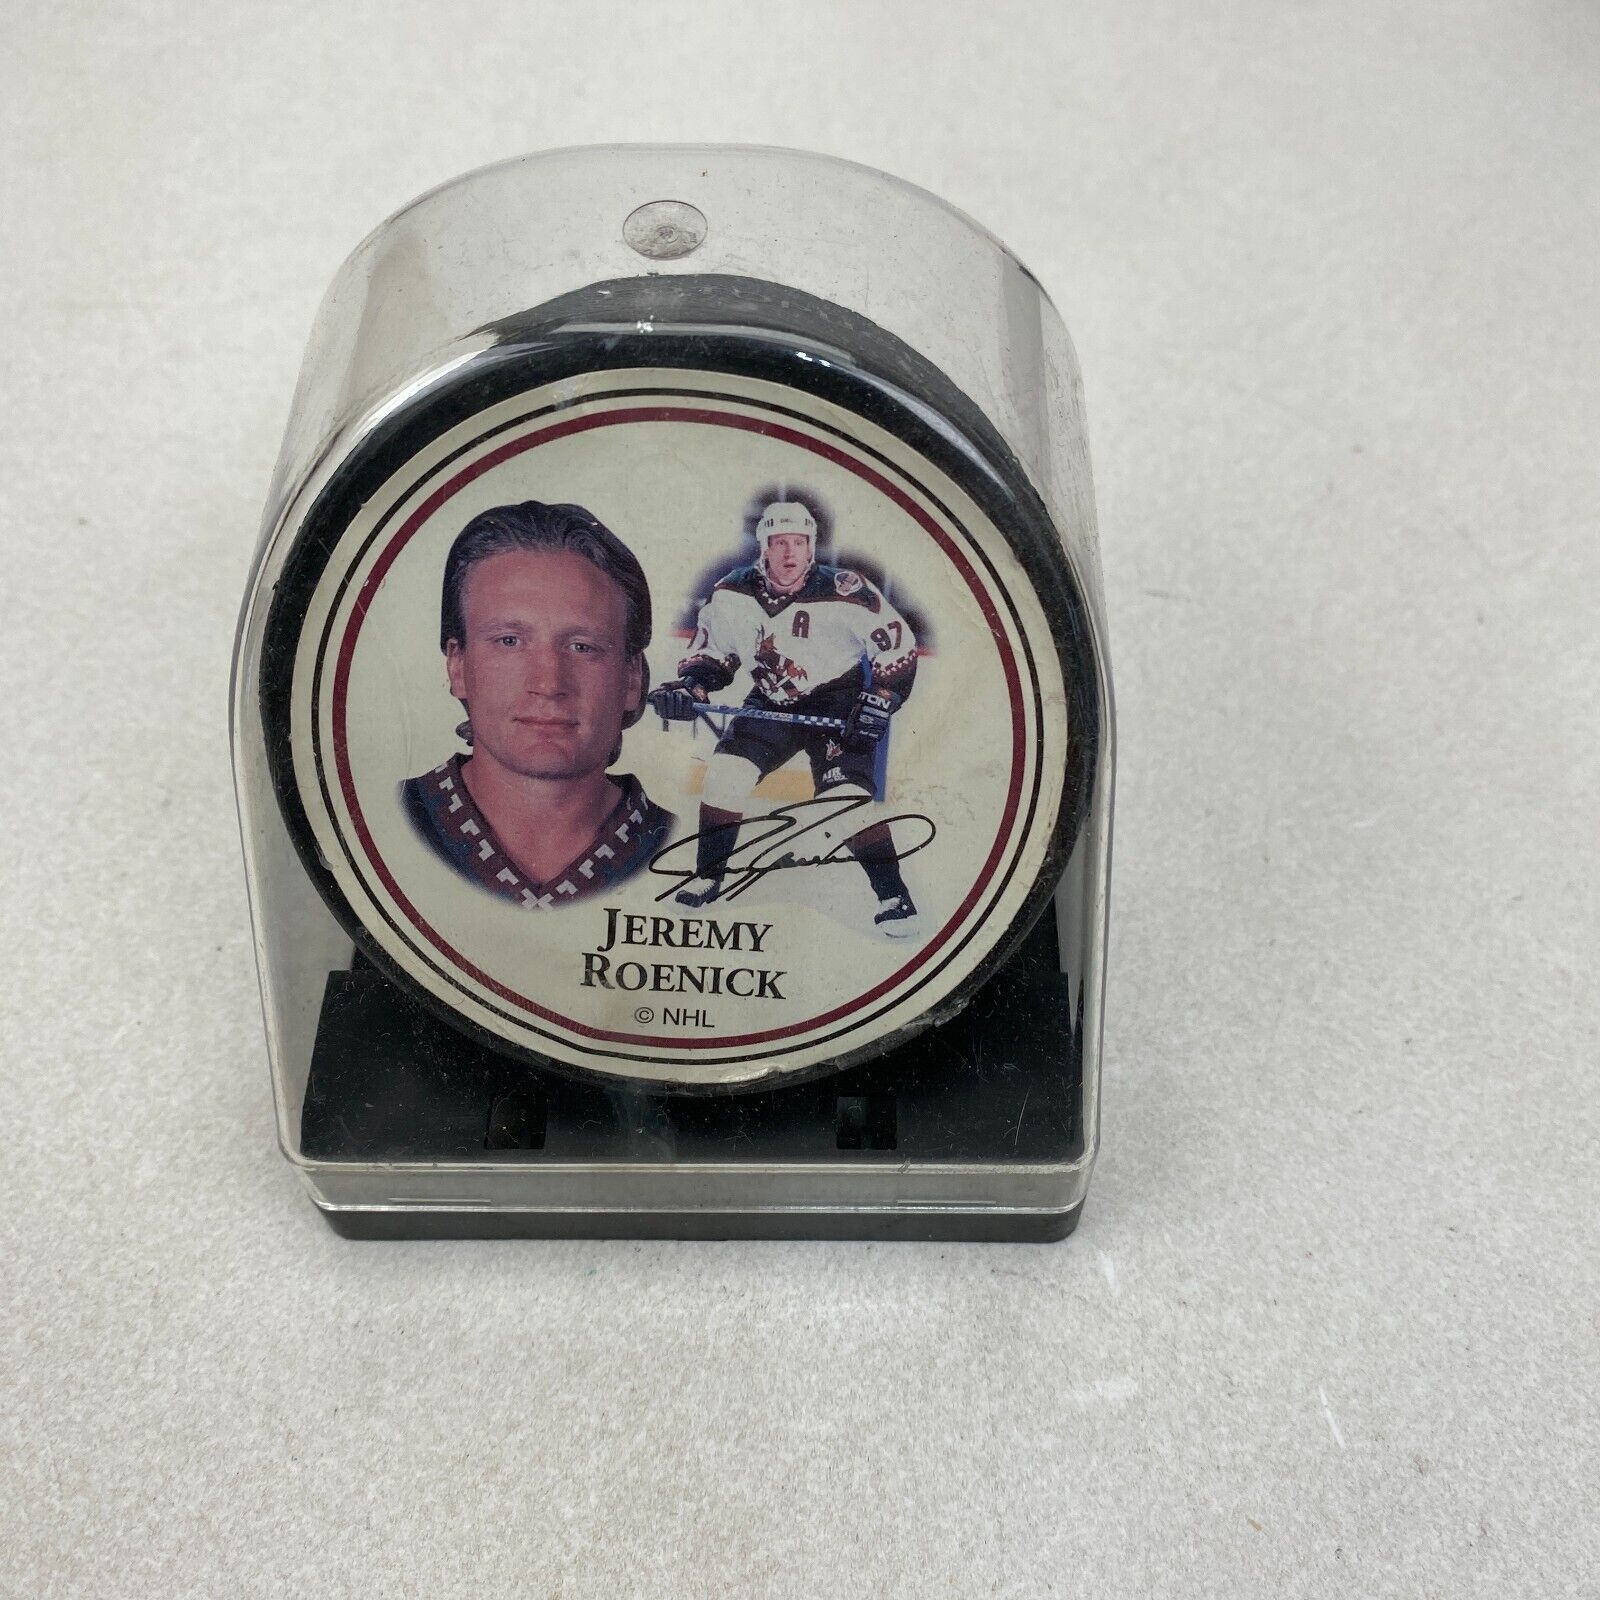 Primary image for Arizona Coyotes NHL Souvenir Hockey Puck Jeremy Roenick